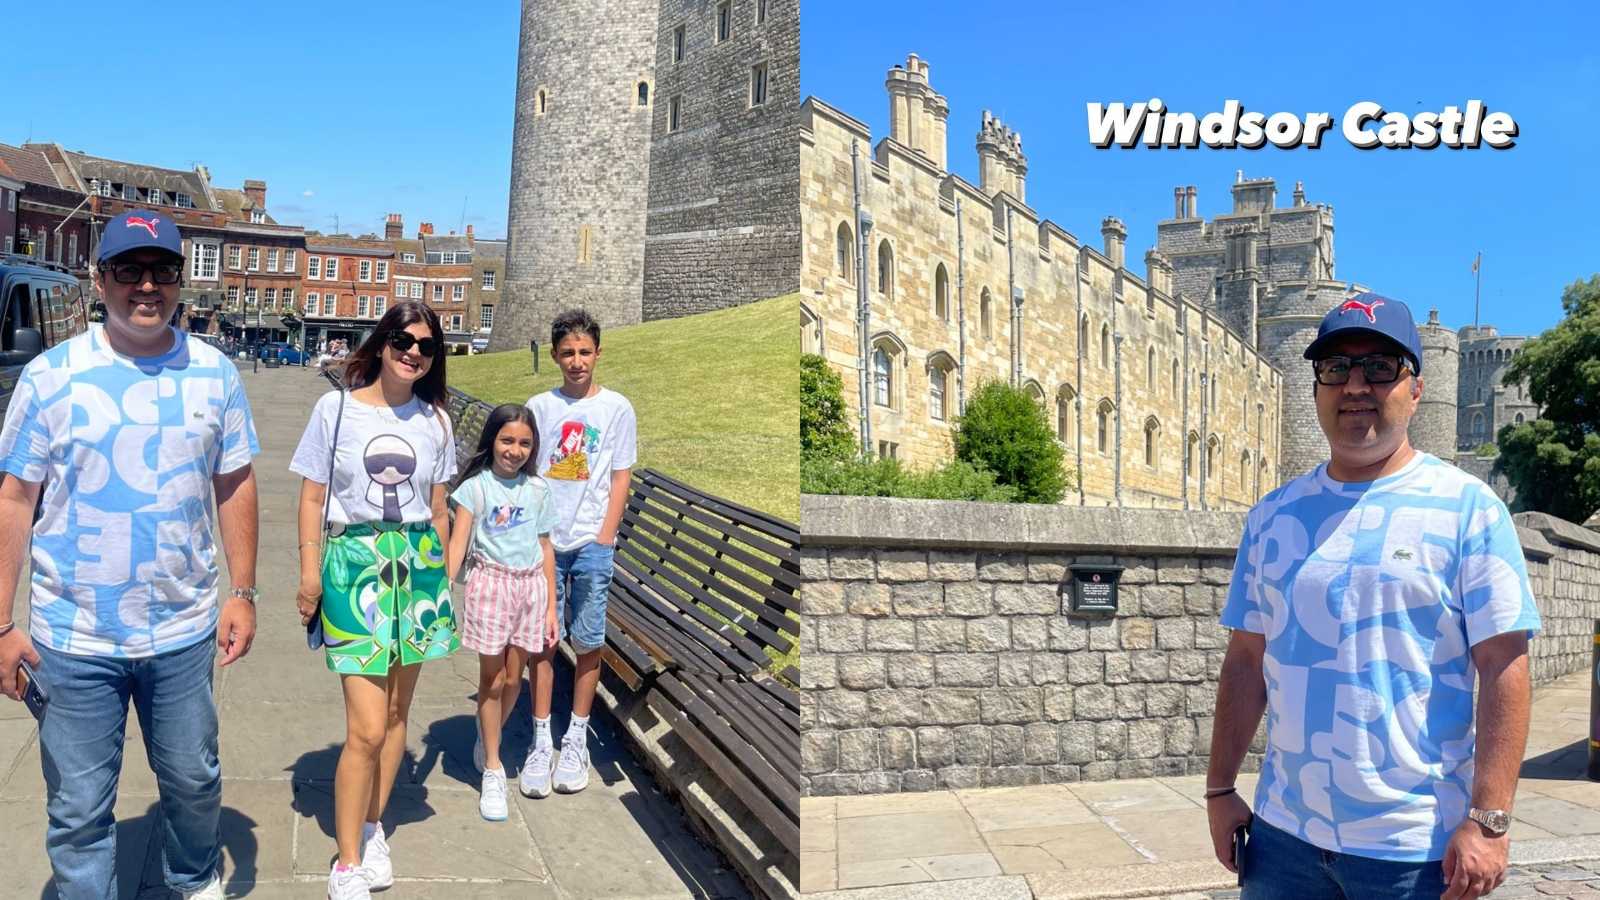 Shark Tank India judge Ashneer Grover turns 40, wife Madhur Grover says 'Welcome to the club'; See pics from their London vacay